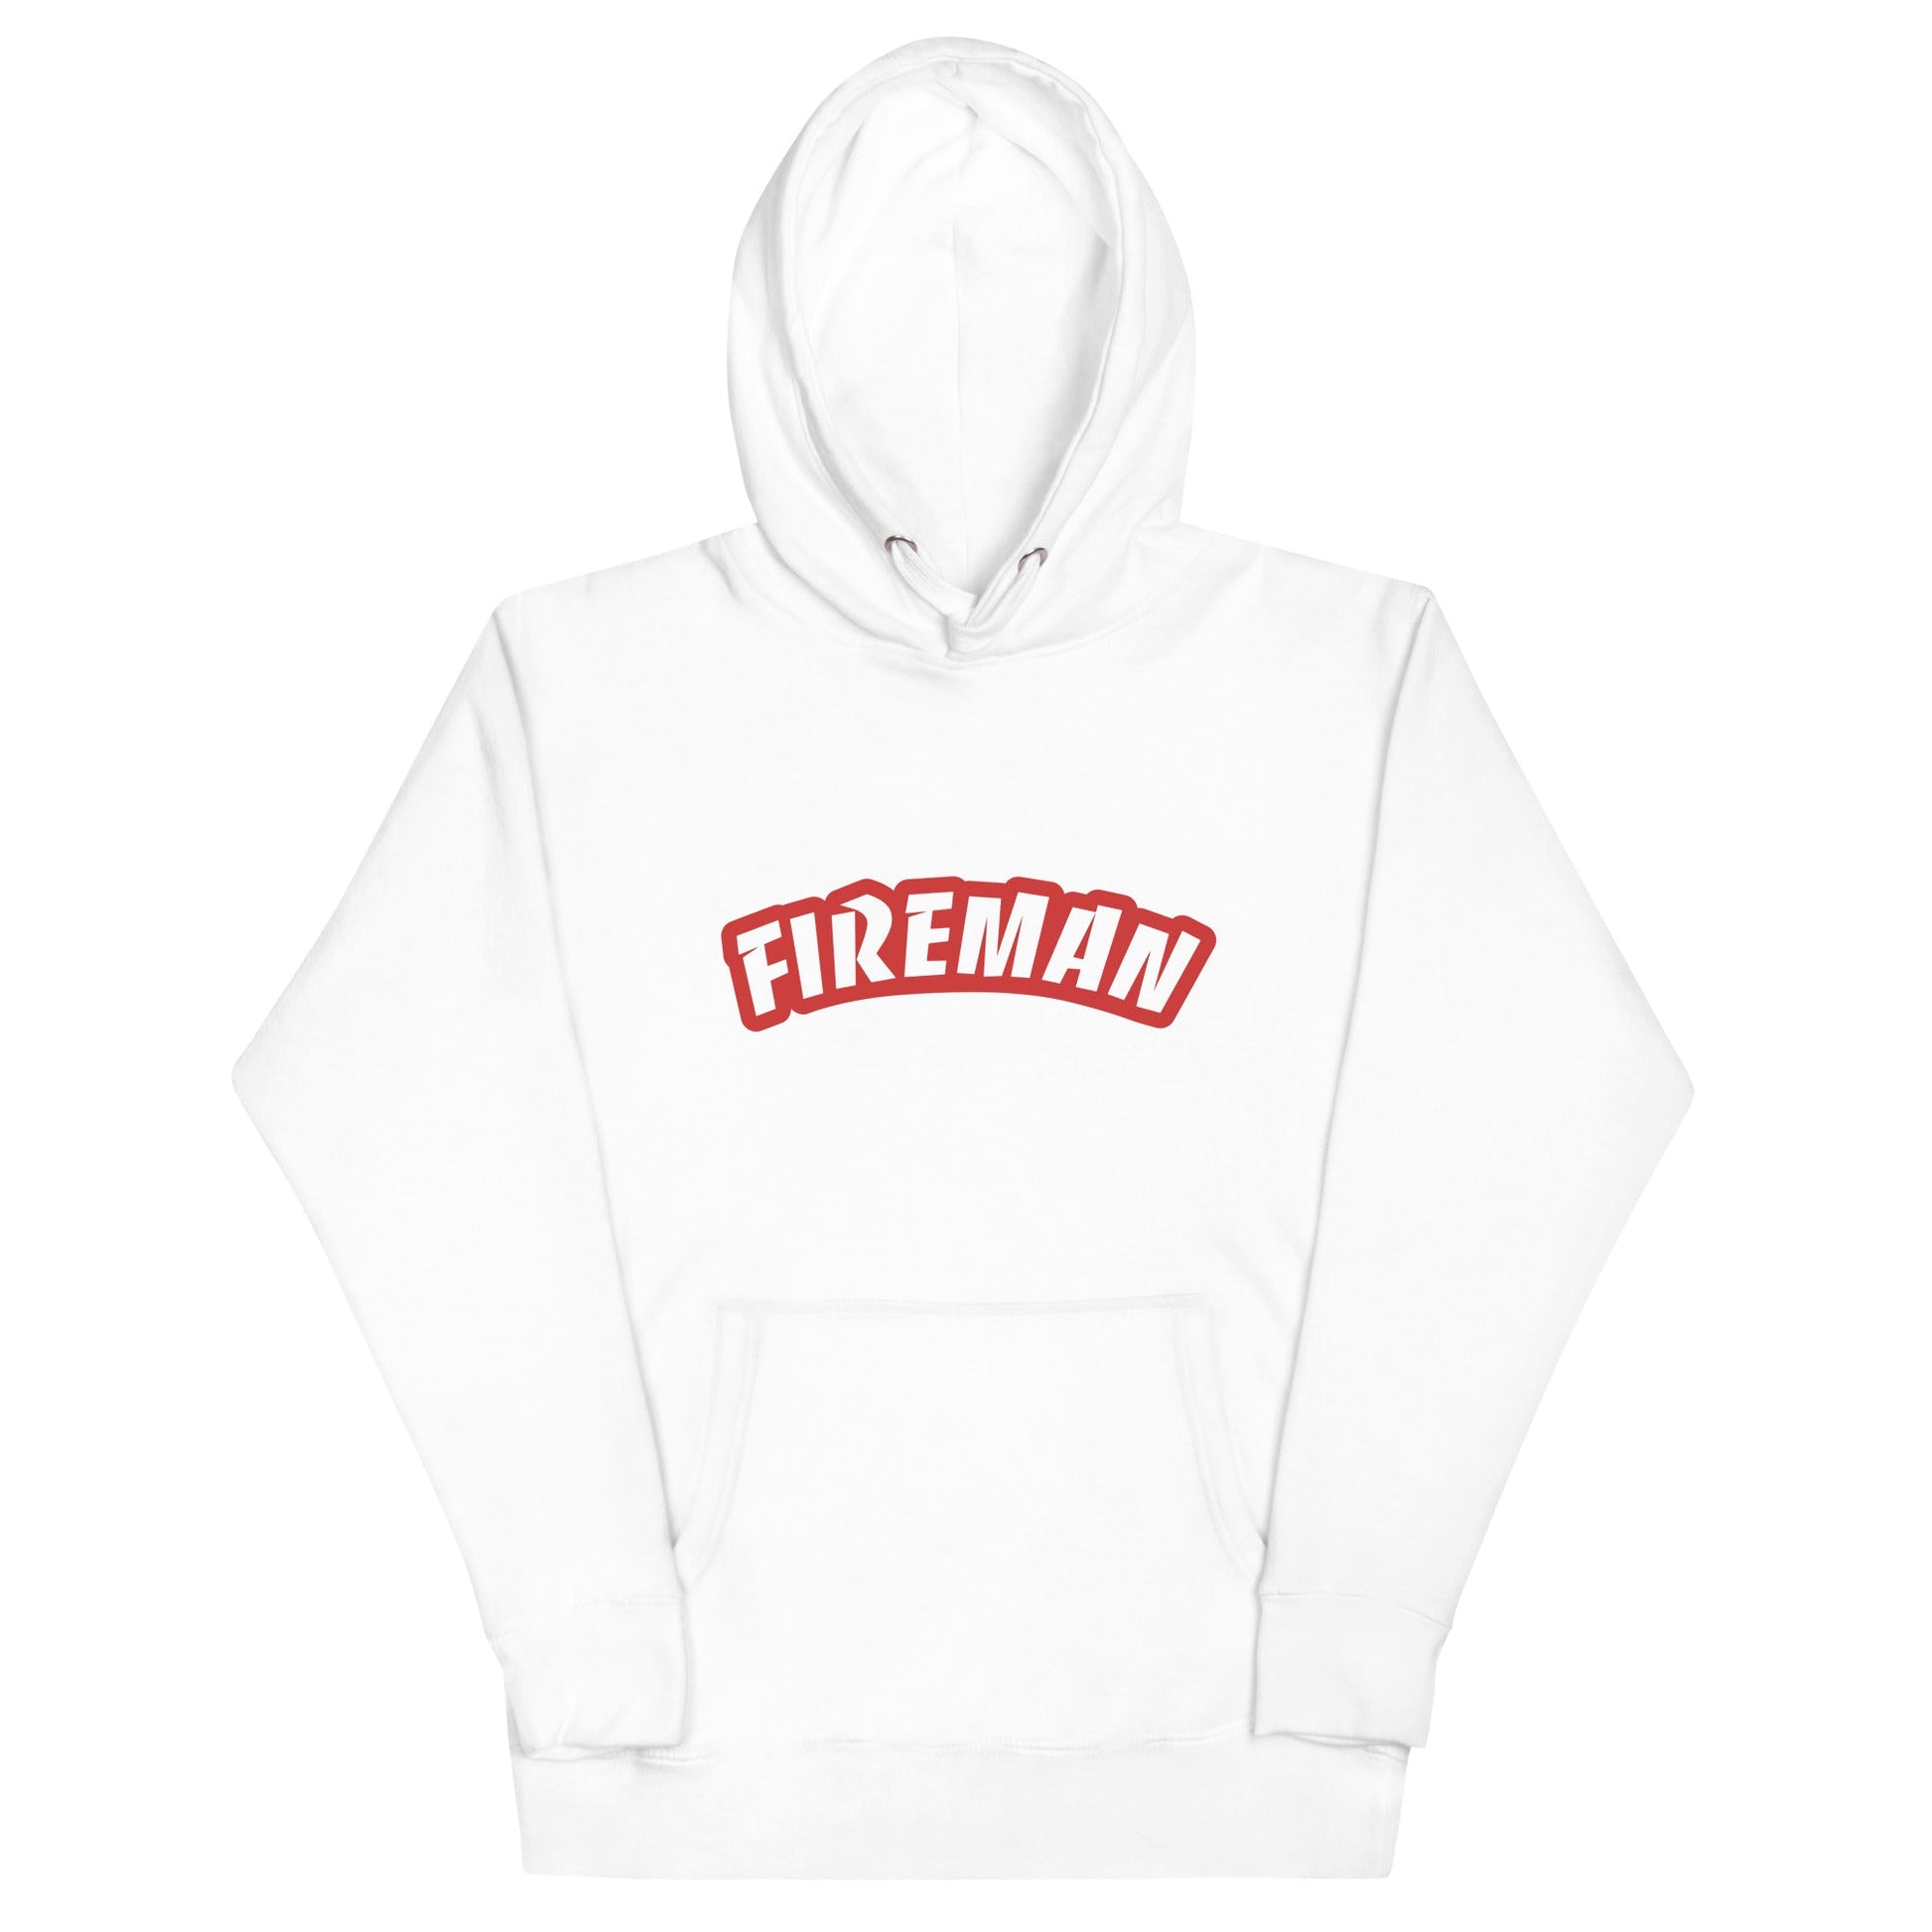 White hoodie with Fireman text on white background